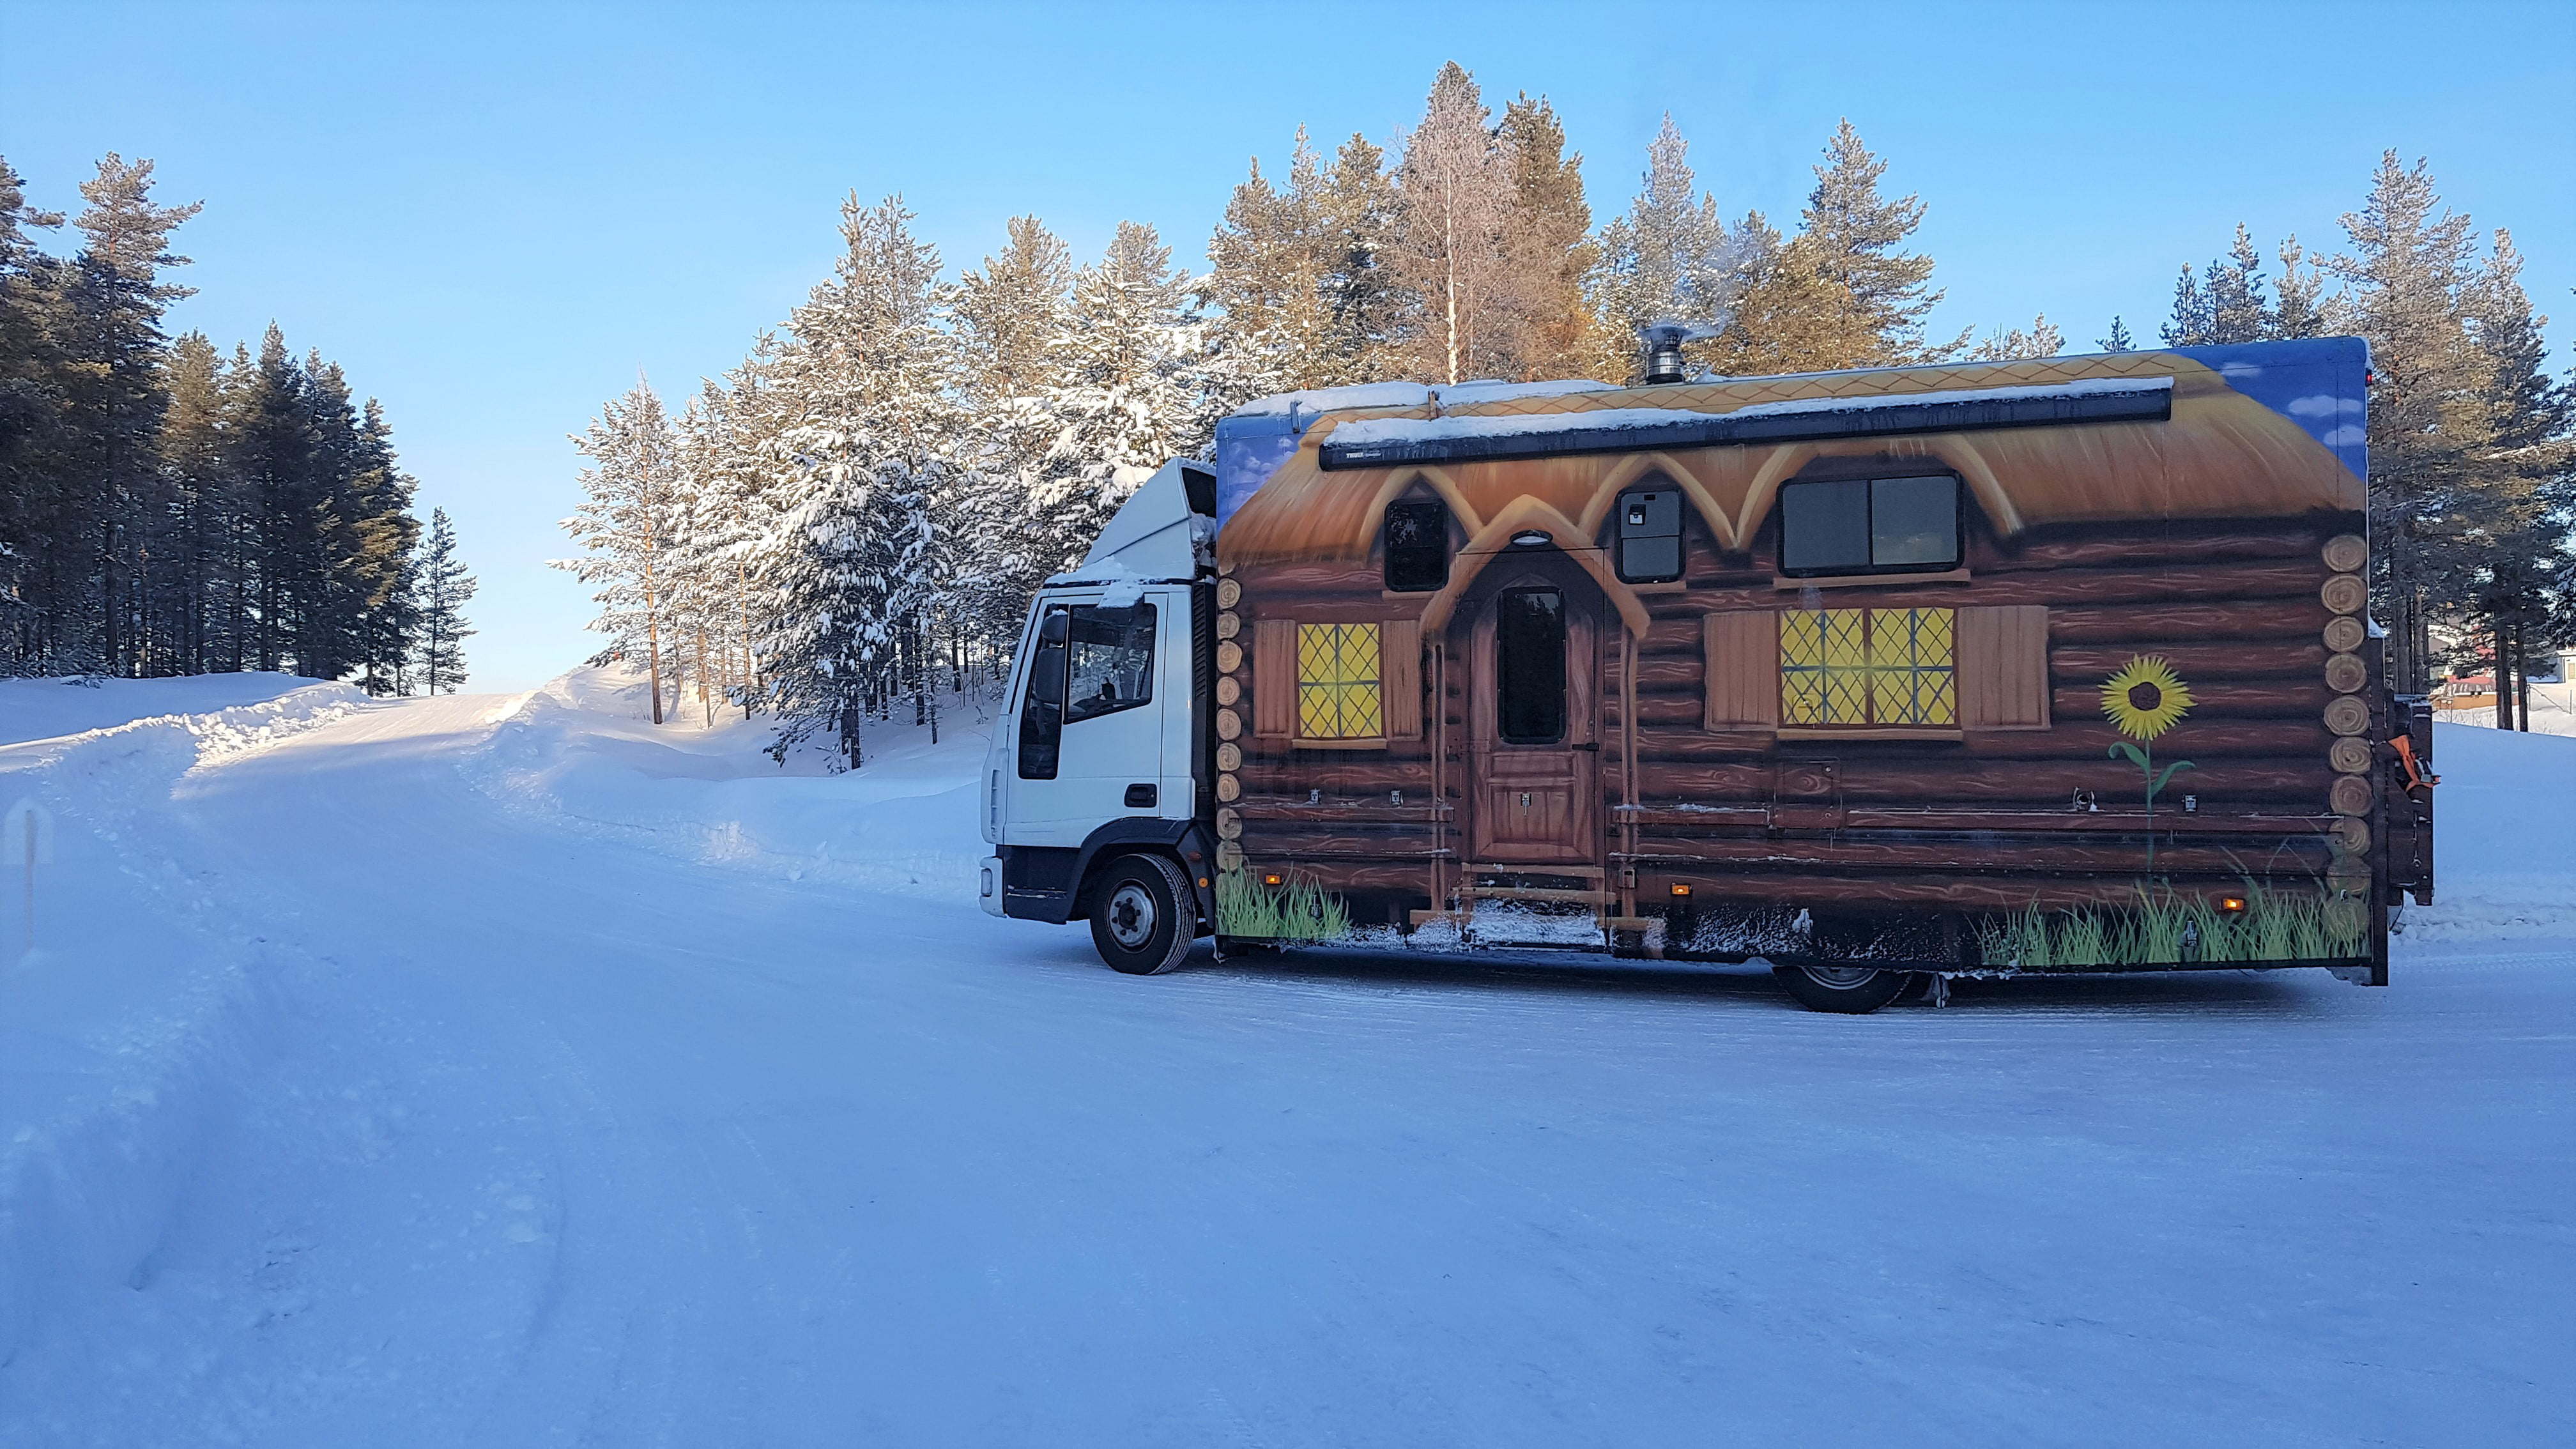 Falken's highway RI151 and BI851 tyres have helped customer Kevin Hancock and his Iveco campervan – converted from a former life as a mobile police office – make an incredible journey from Swansea, Wales all the way to the Arctic Circle, with temperatures reaching a low as -27 degrees Celsius.